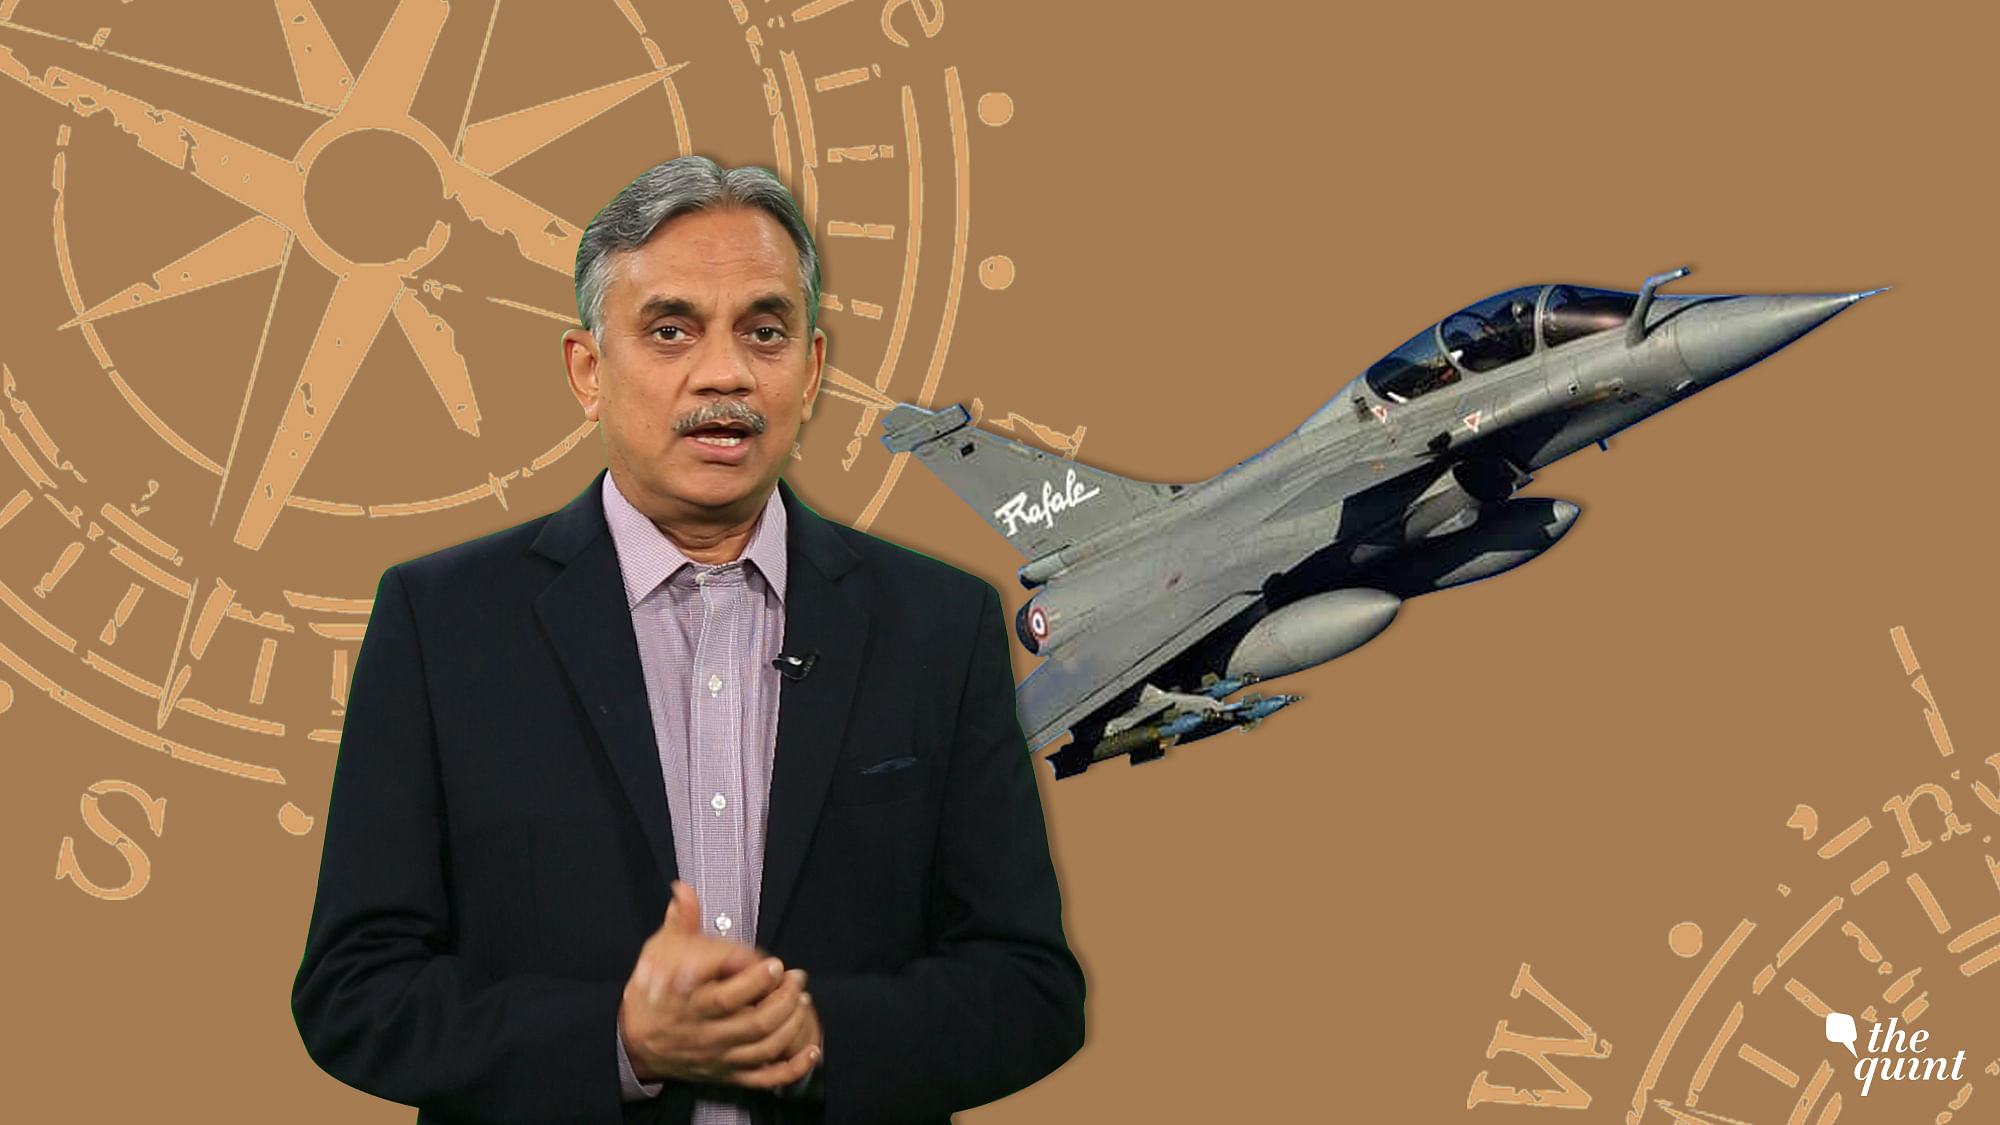 Despite the government’s efforts to not divulge details, the ‘secrets’ of the Rafale deal are out. How did these secrets come out?